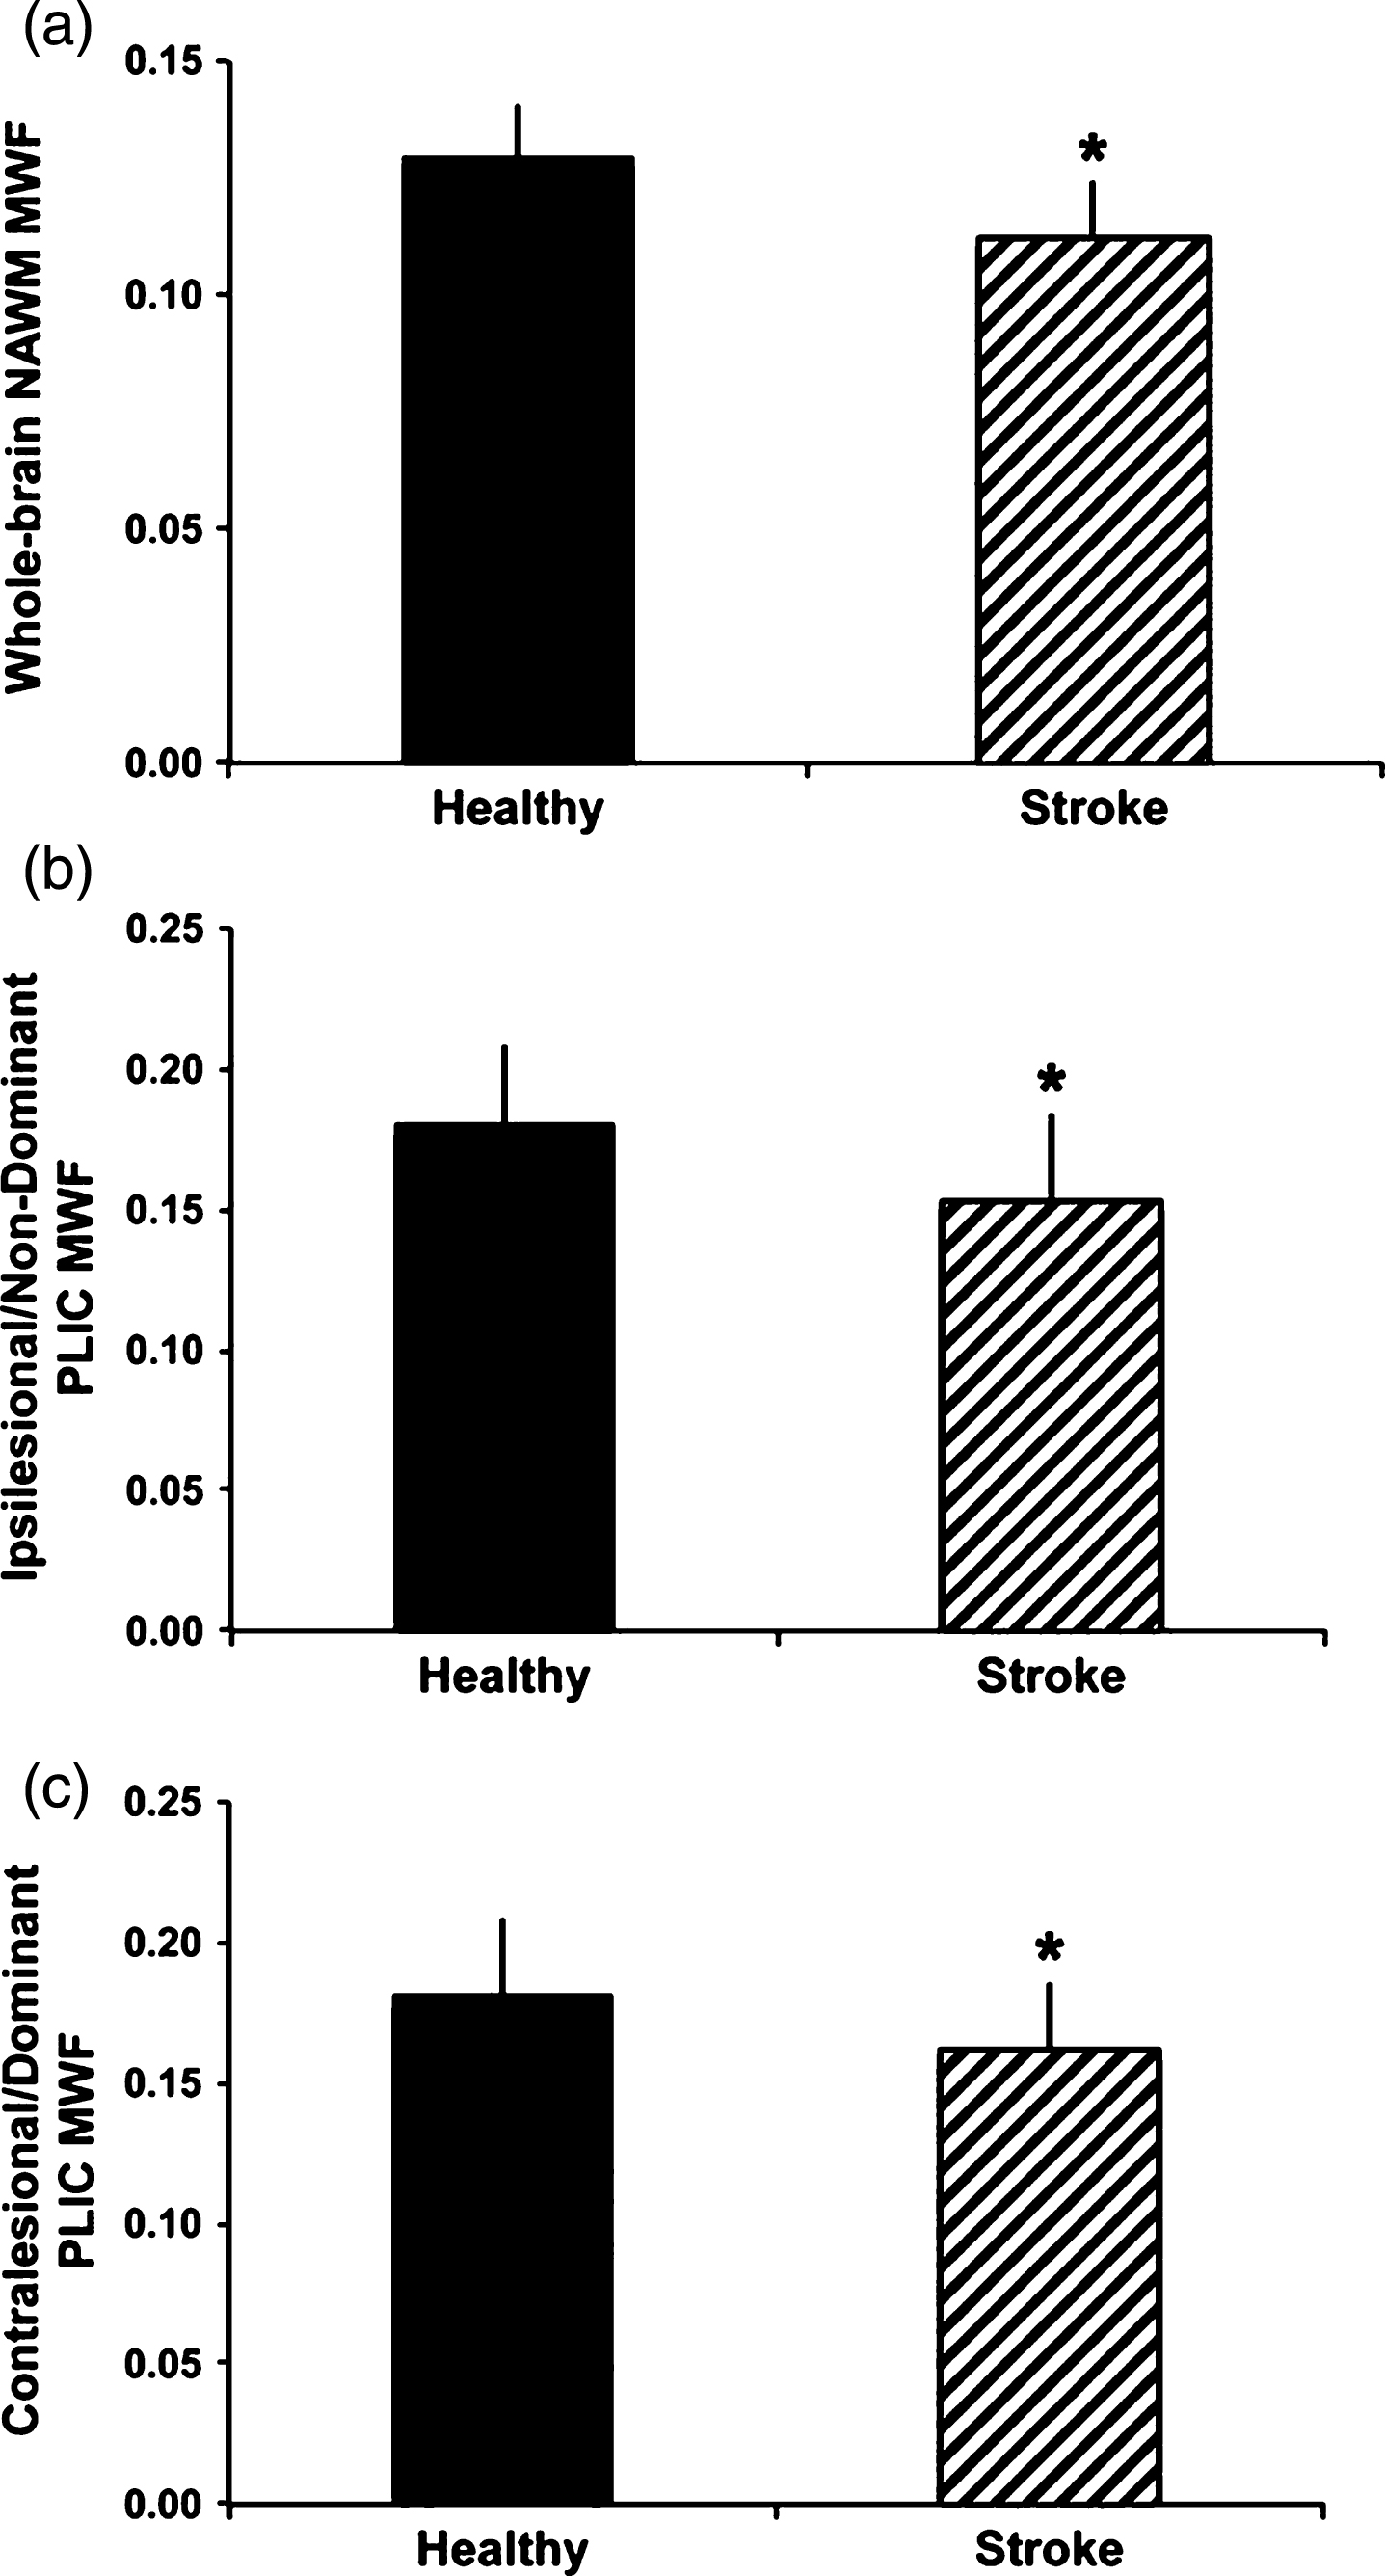 Group differences in myelin water fraction (MWF) between healthy controls and participants with chronic stroke. MWF was significantly reduced in whole-cerebrum normal appearing white matter (NAWM) in the stroke group comparedtowhole-cerebrum NAWMinthehealthy group(A),intheipsilesional posterior limb of internal capsule (PLIC) and non-dominant PLIC MWF in the healthy group (B) and in the contralesional PLIC for the stroke group versus dominant PLIC in the healthy group (C) (*p b 0.05). Error bars represent standard deviation (Fig. 5, Borich MR, Mackay AL, Vavasour IM, Rauscher A, Boyd LA. Evaluation of white matter myelin water fraction in chronic stroke. Neuroimage Clin. 2013;2:569-80).